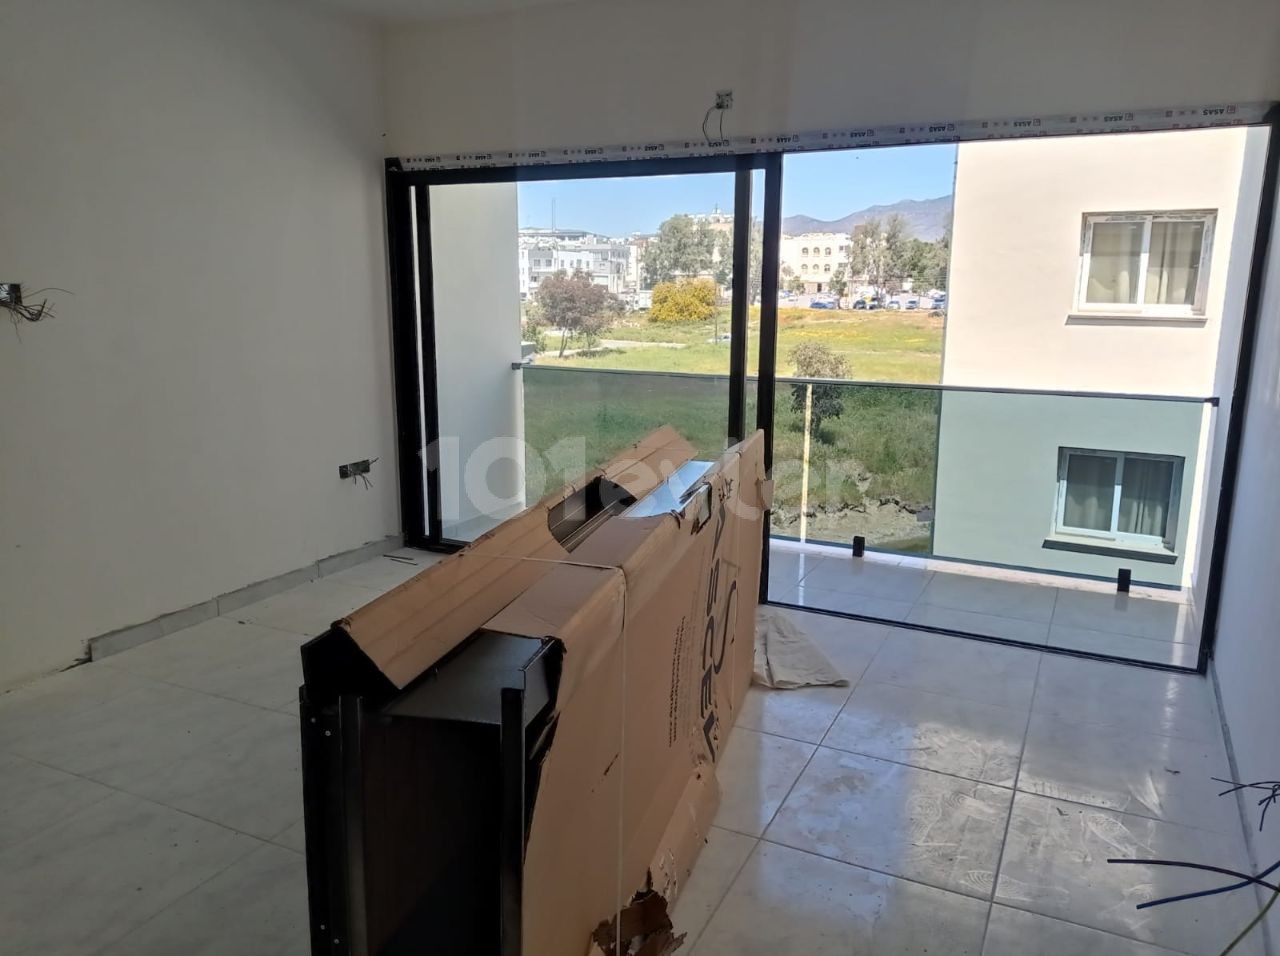 2+1 ground floor for sale in the marmara region, in the center of the city, within walking distance to the metropolis, in a splendid location ** 